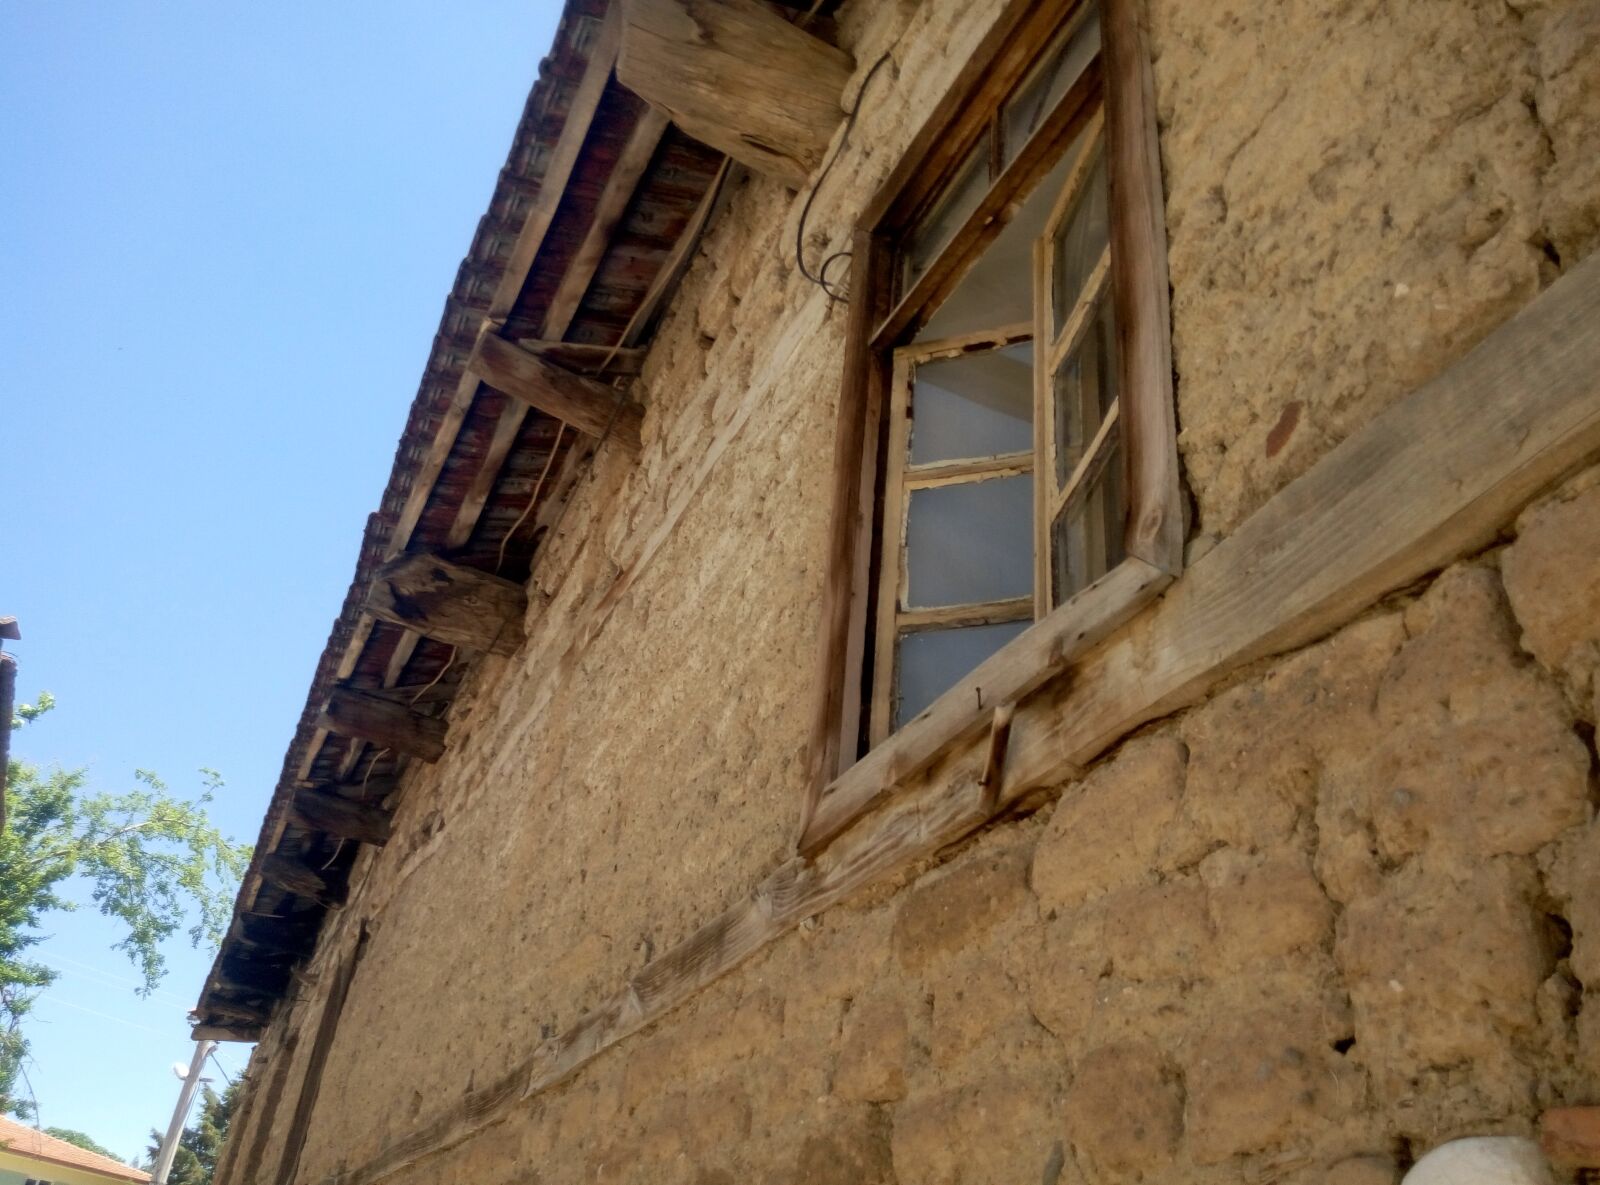 Meizu m2 note sample photo. Building, old, architecture photography